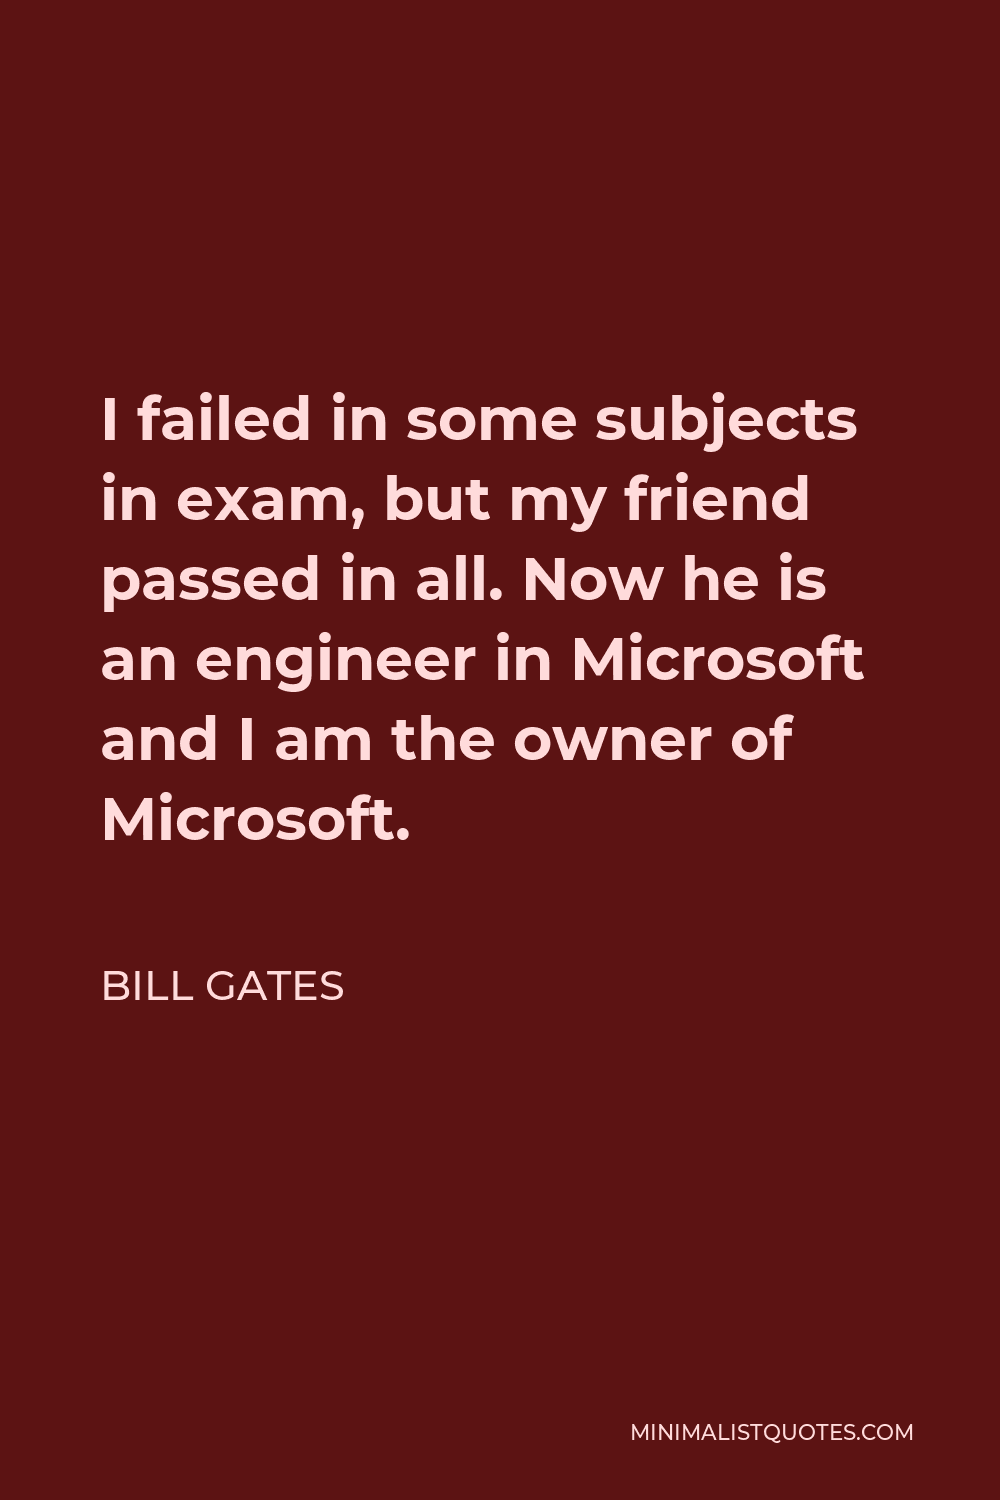 Bill Gates Quote - I failed in some subjects in exam, but my friend passed in all. Now he is an engineer in Microsoft and I am the owner of Microsoft.